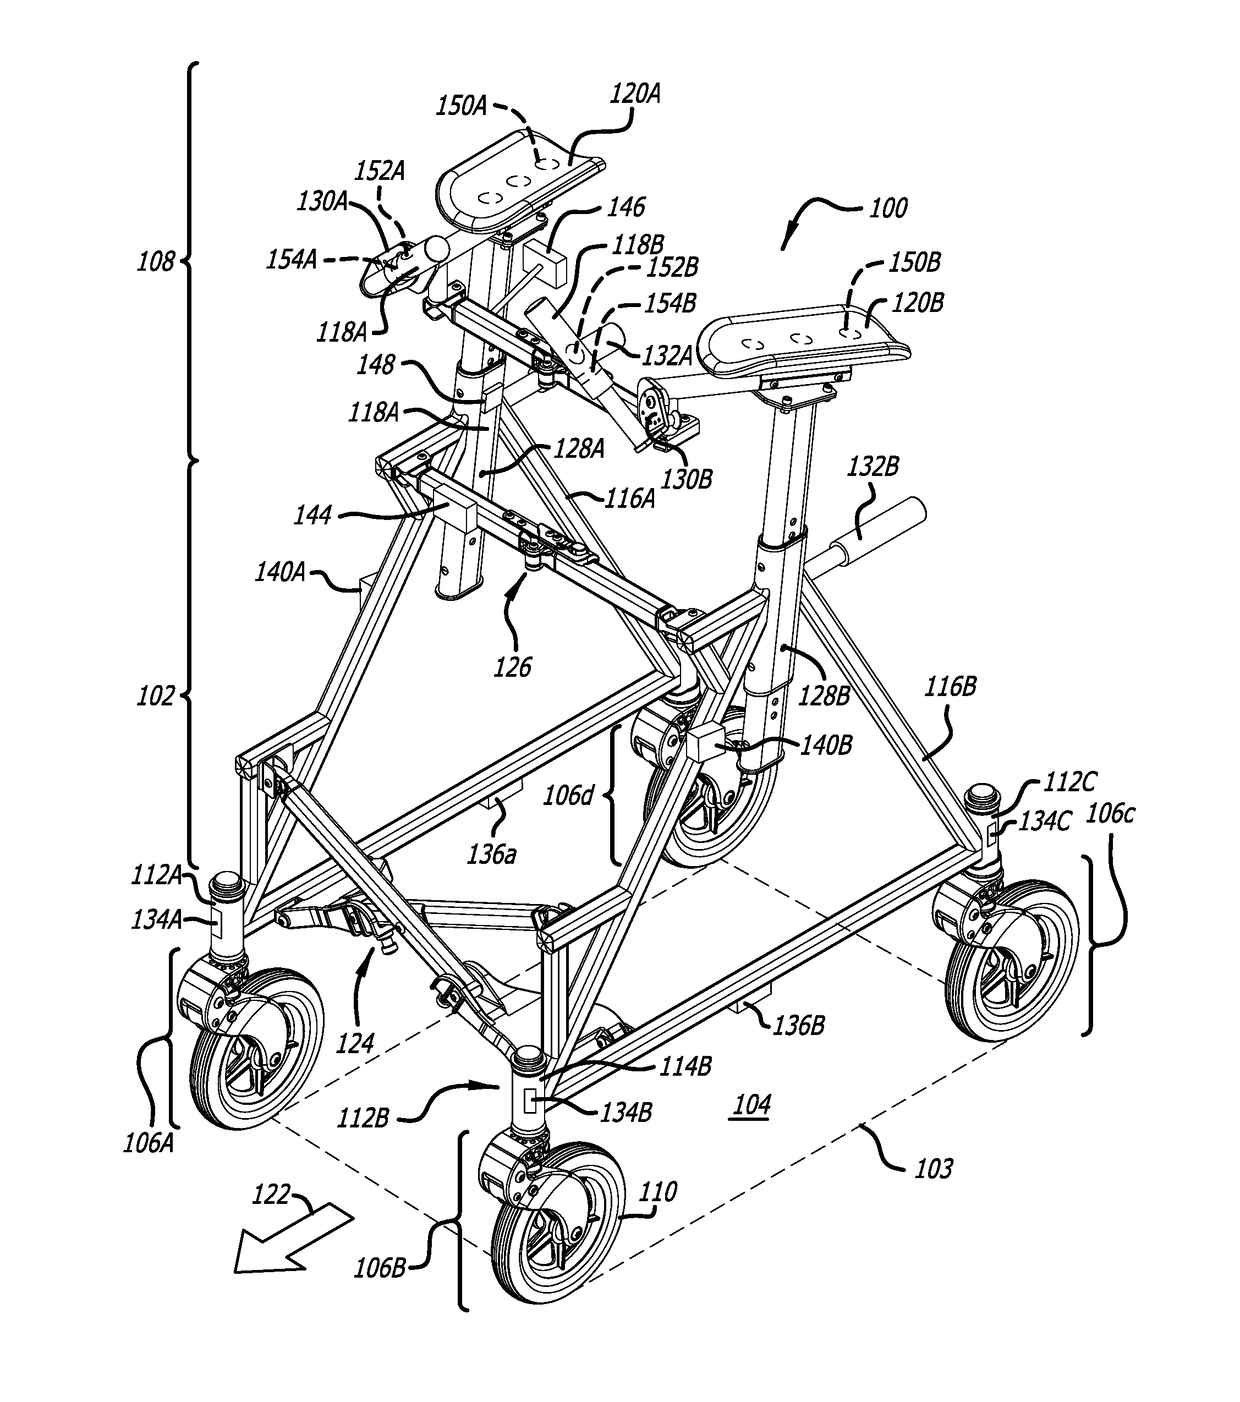 Upright walker having a user safety system employing haptic feedback